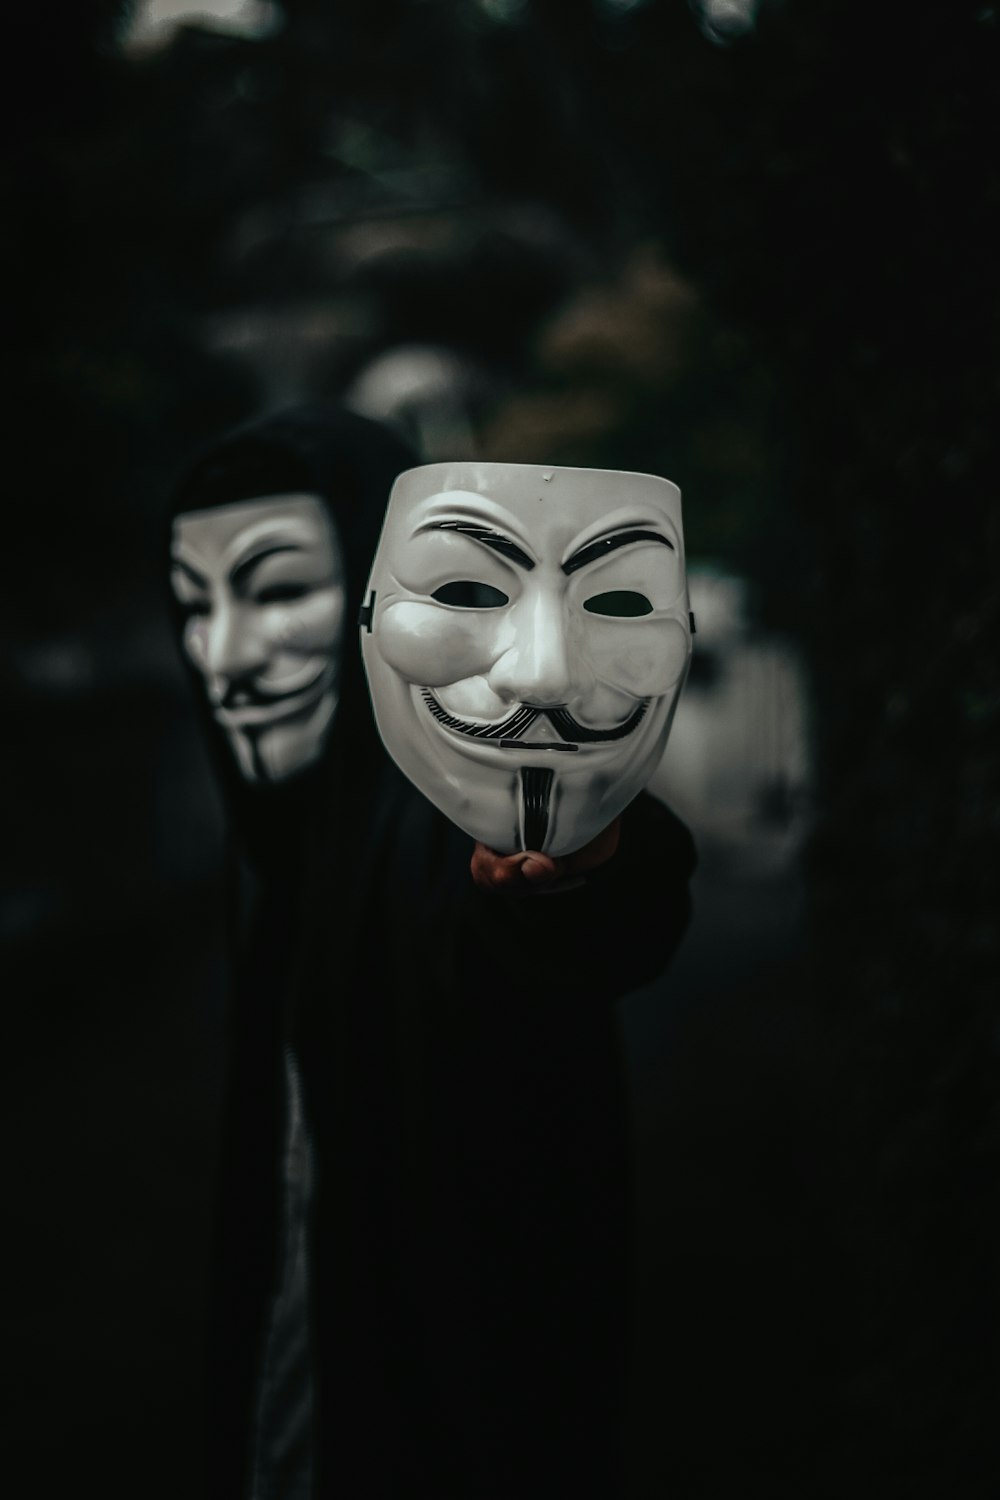 100+ Mask Pictures | Download Free Images & Stock Photos on Unsplash